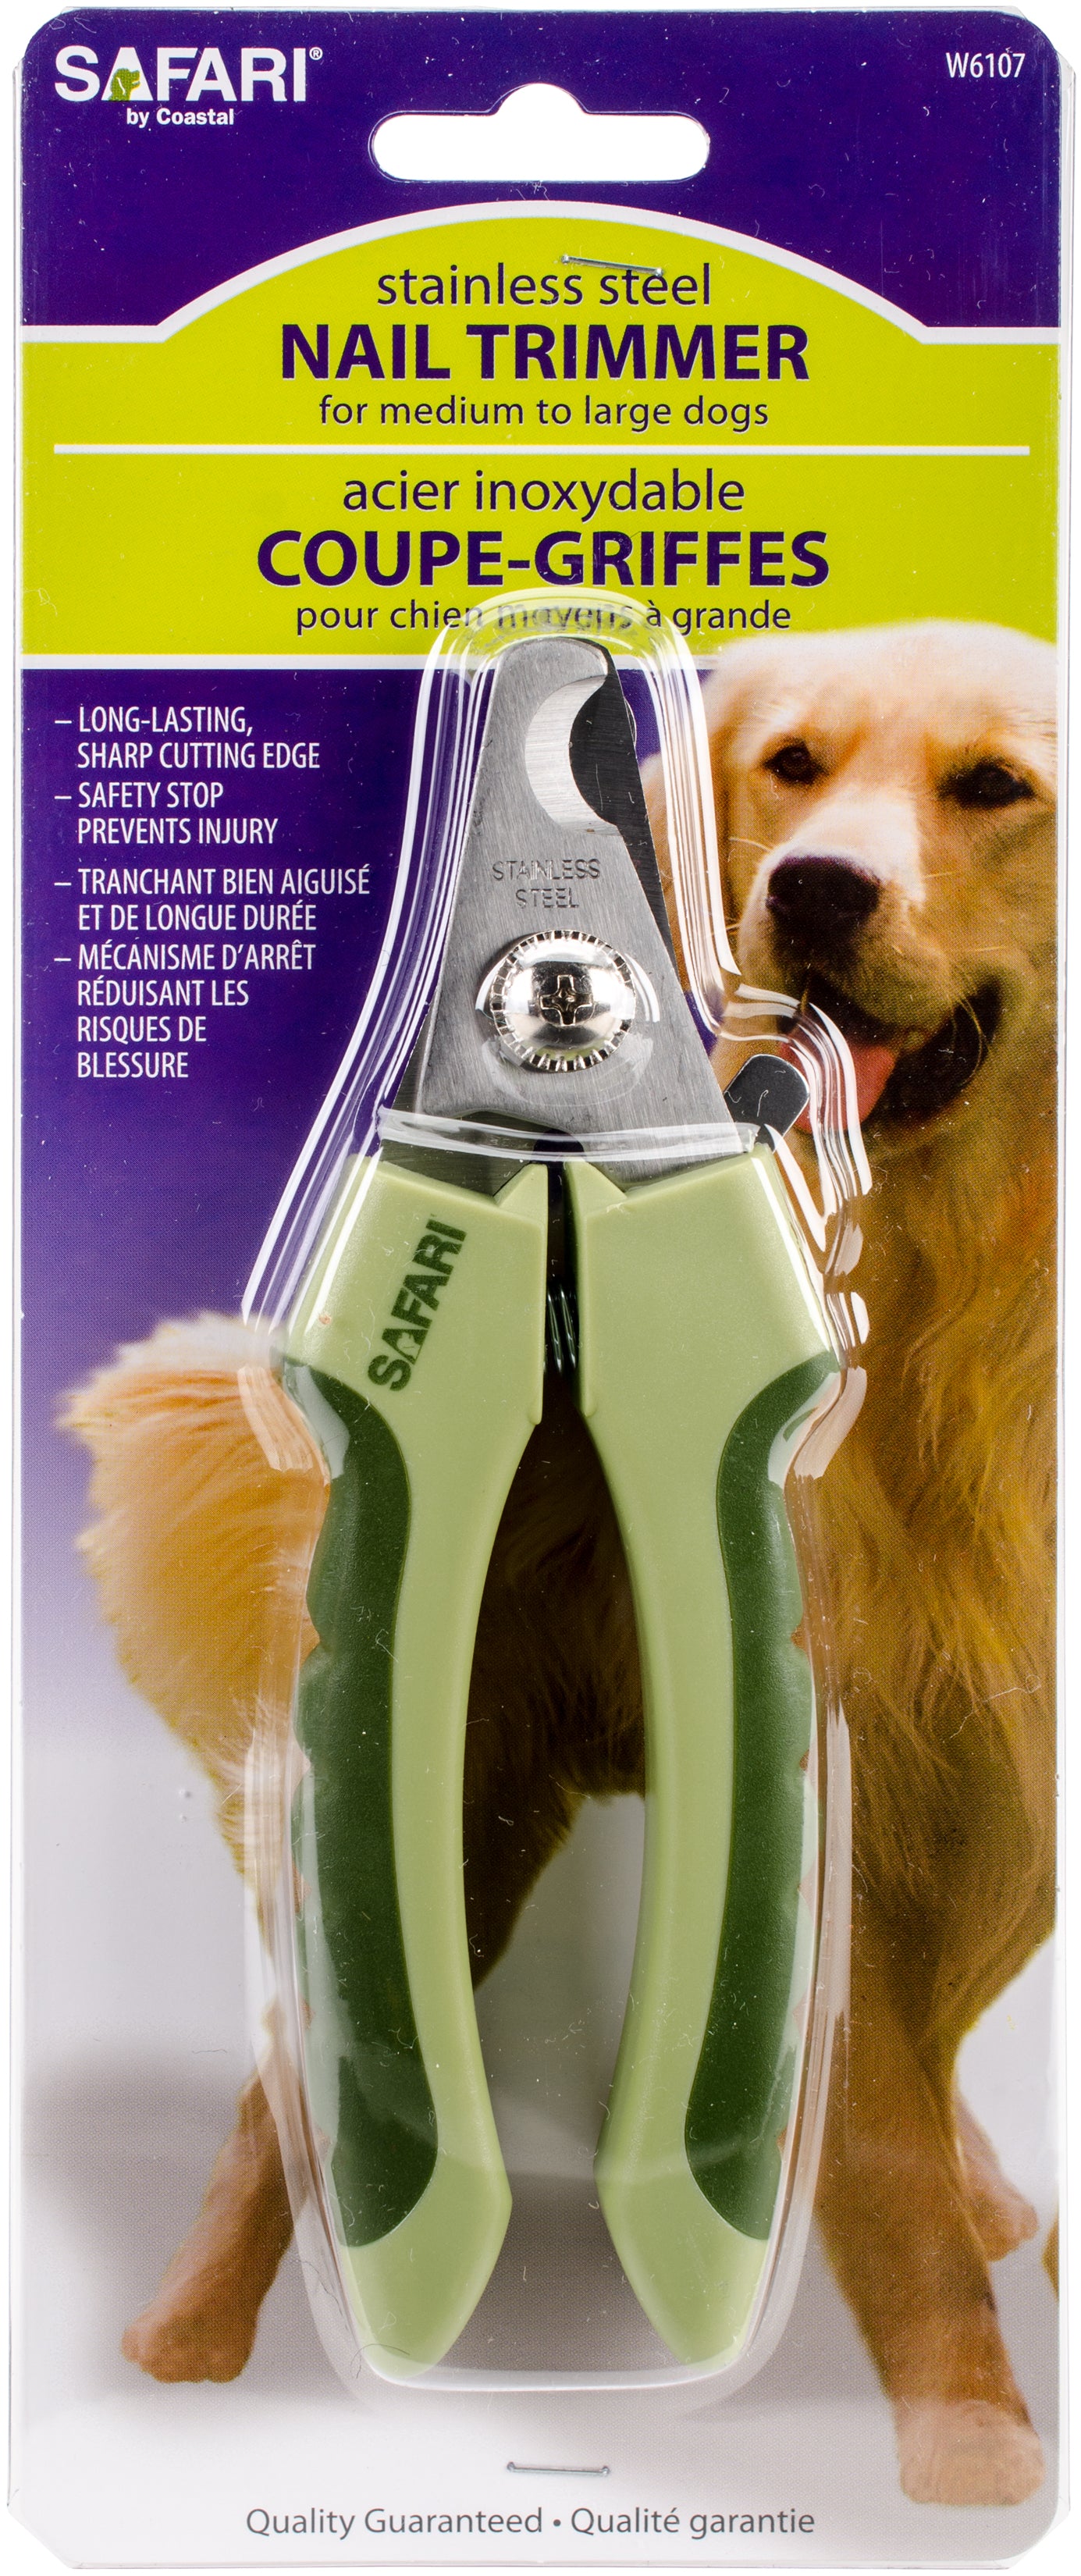 Safari Stainless Steel Nail Trimmer for Large Dogs